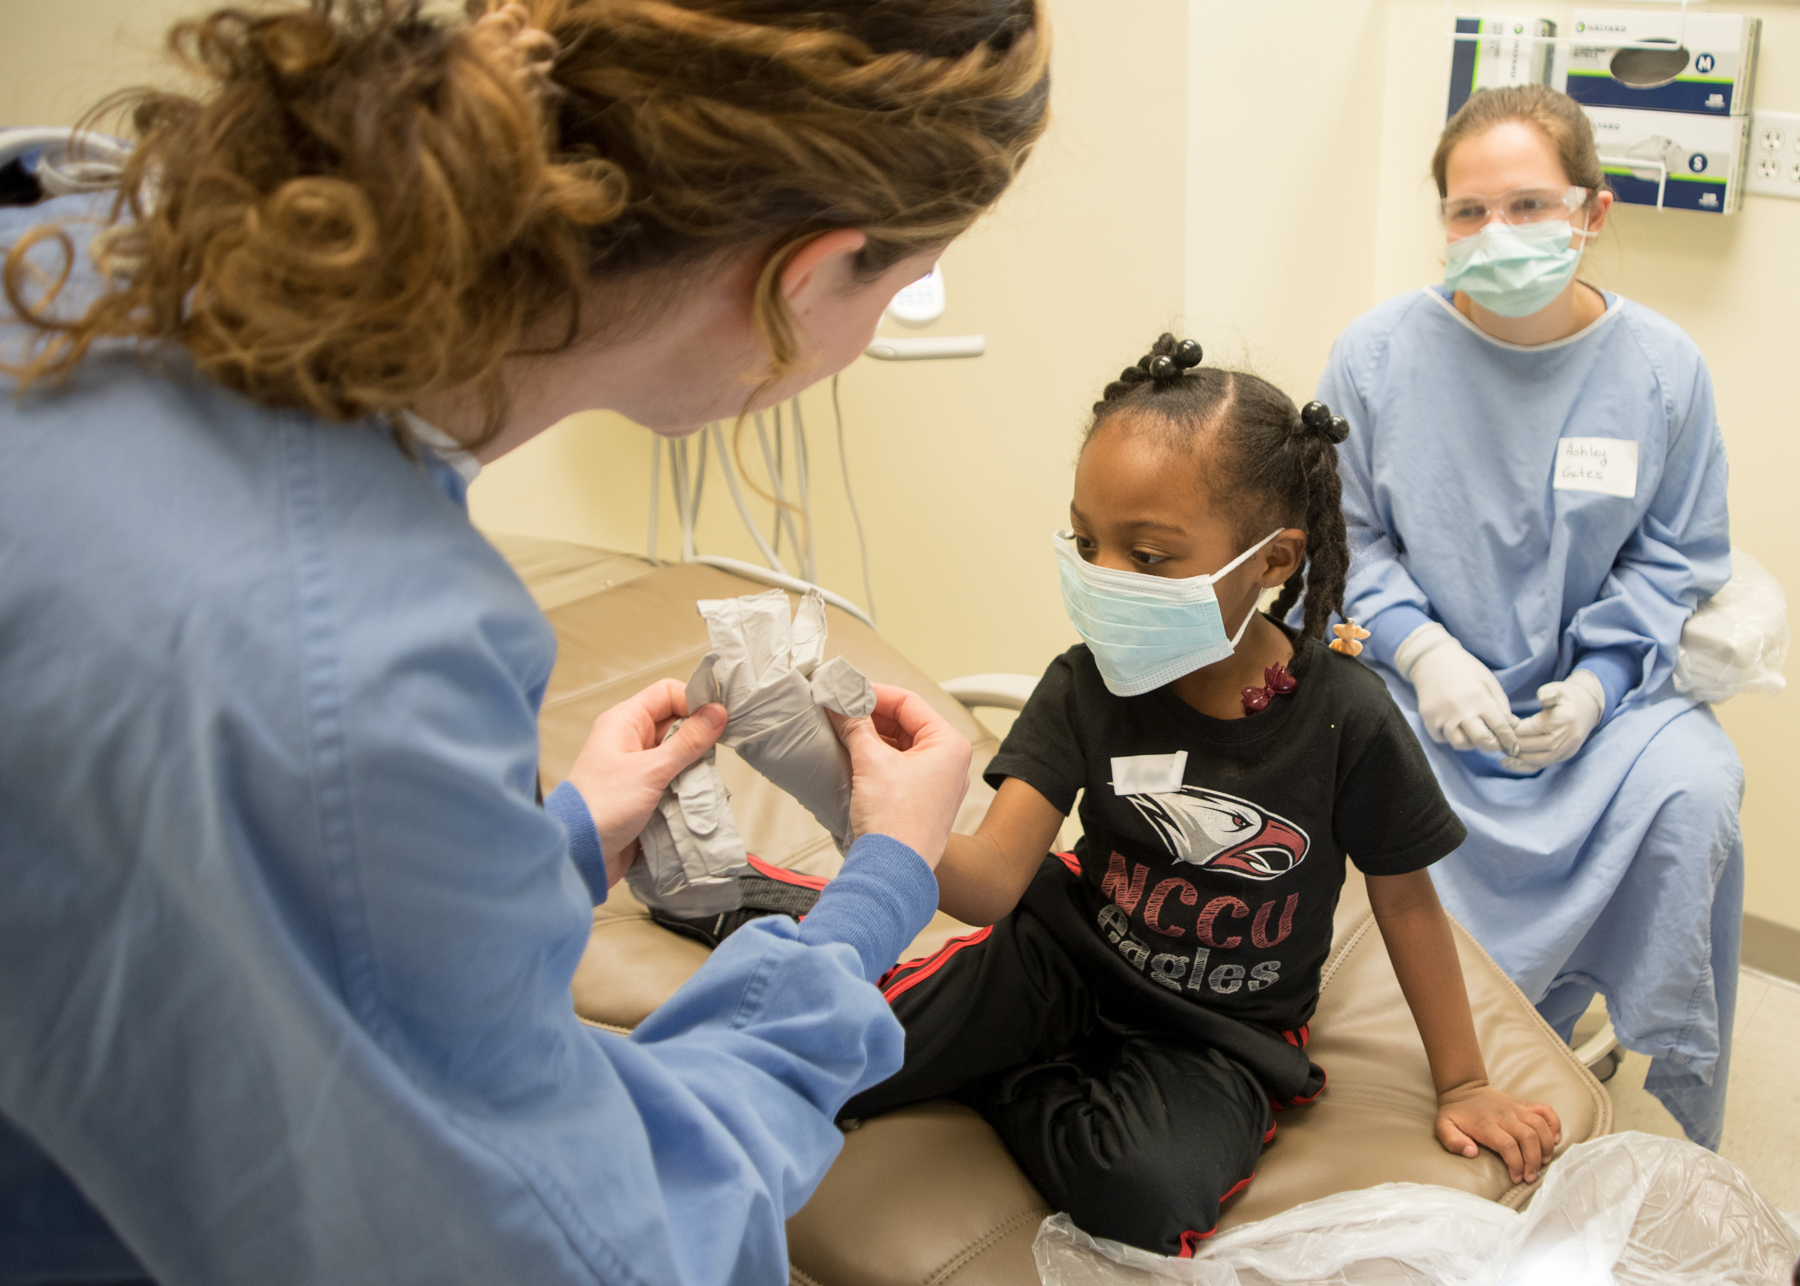 UNC-CH School of Dentistry personnel make the dentist's office a more fun place by allowing the children to try on gloves and masks in the dental chair.